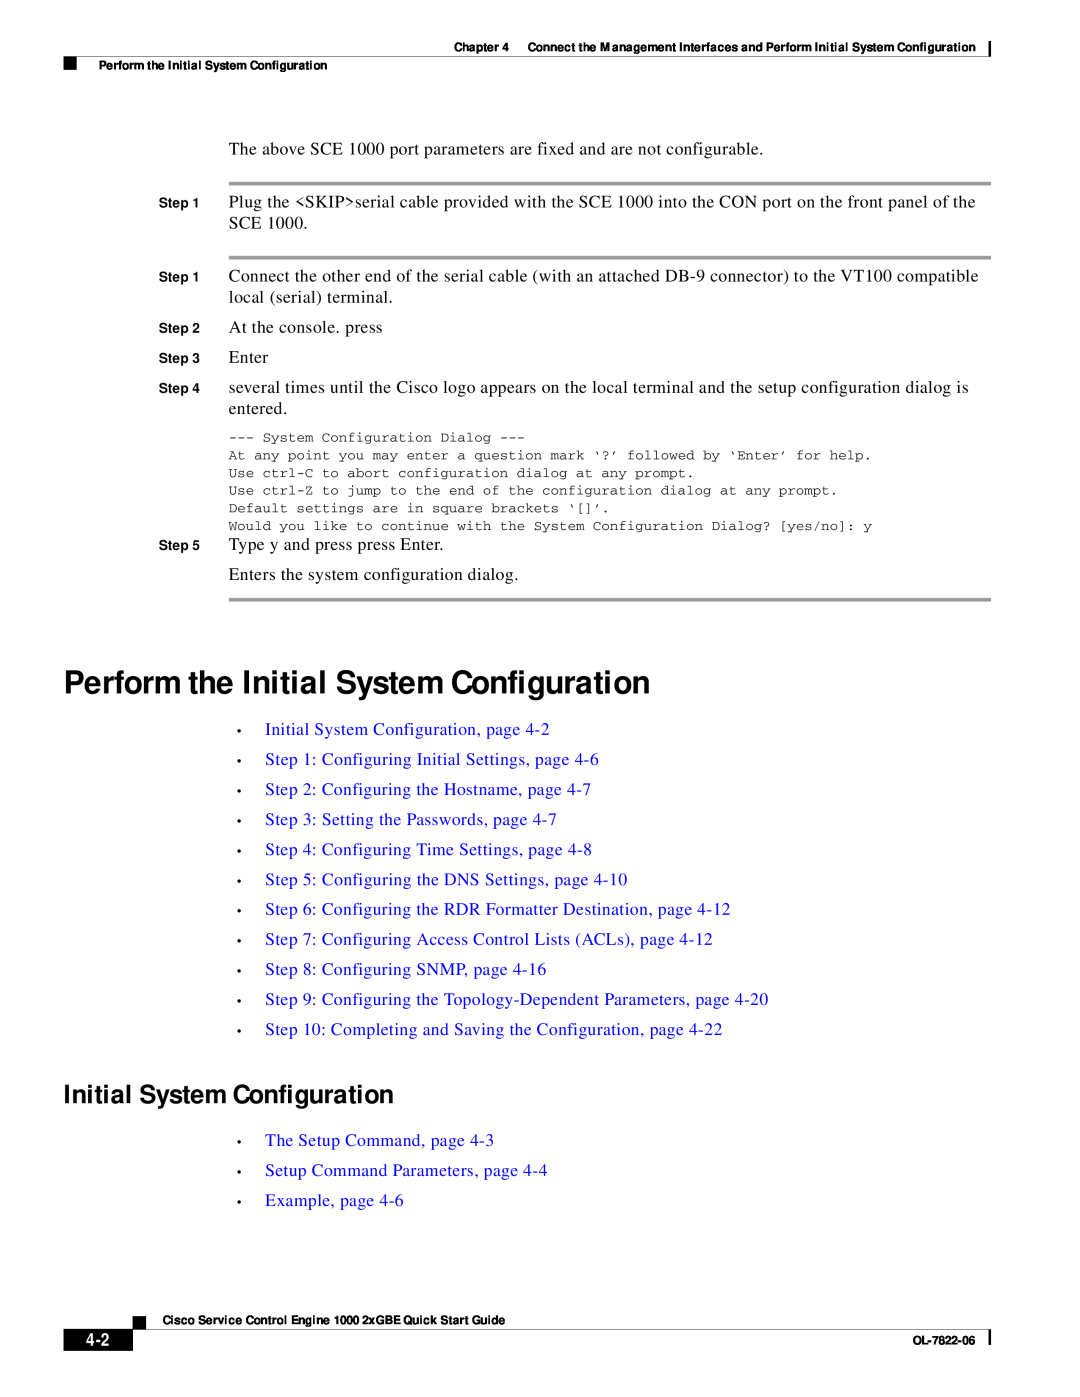 Cisco Systems OL-7822-06 quick start Perform the Initial System Configuration, Initial System Configuration, page 